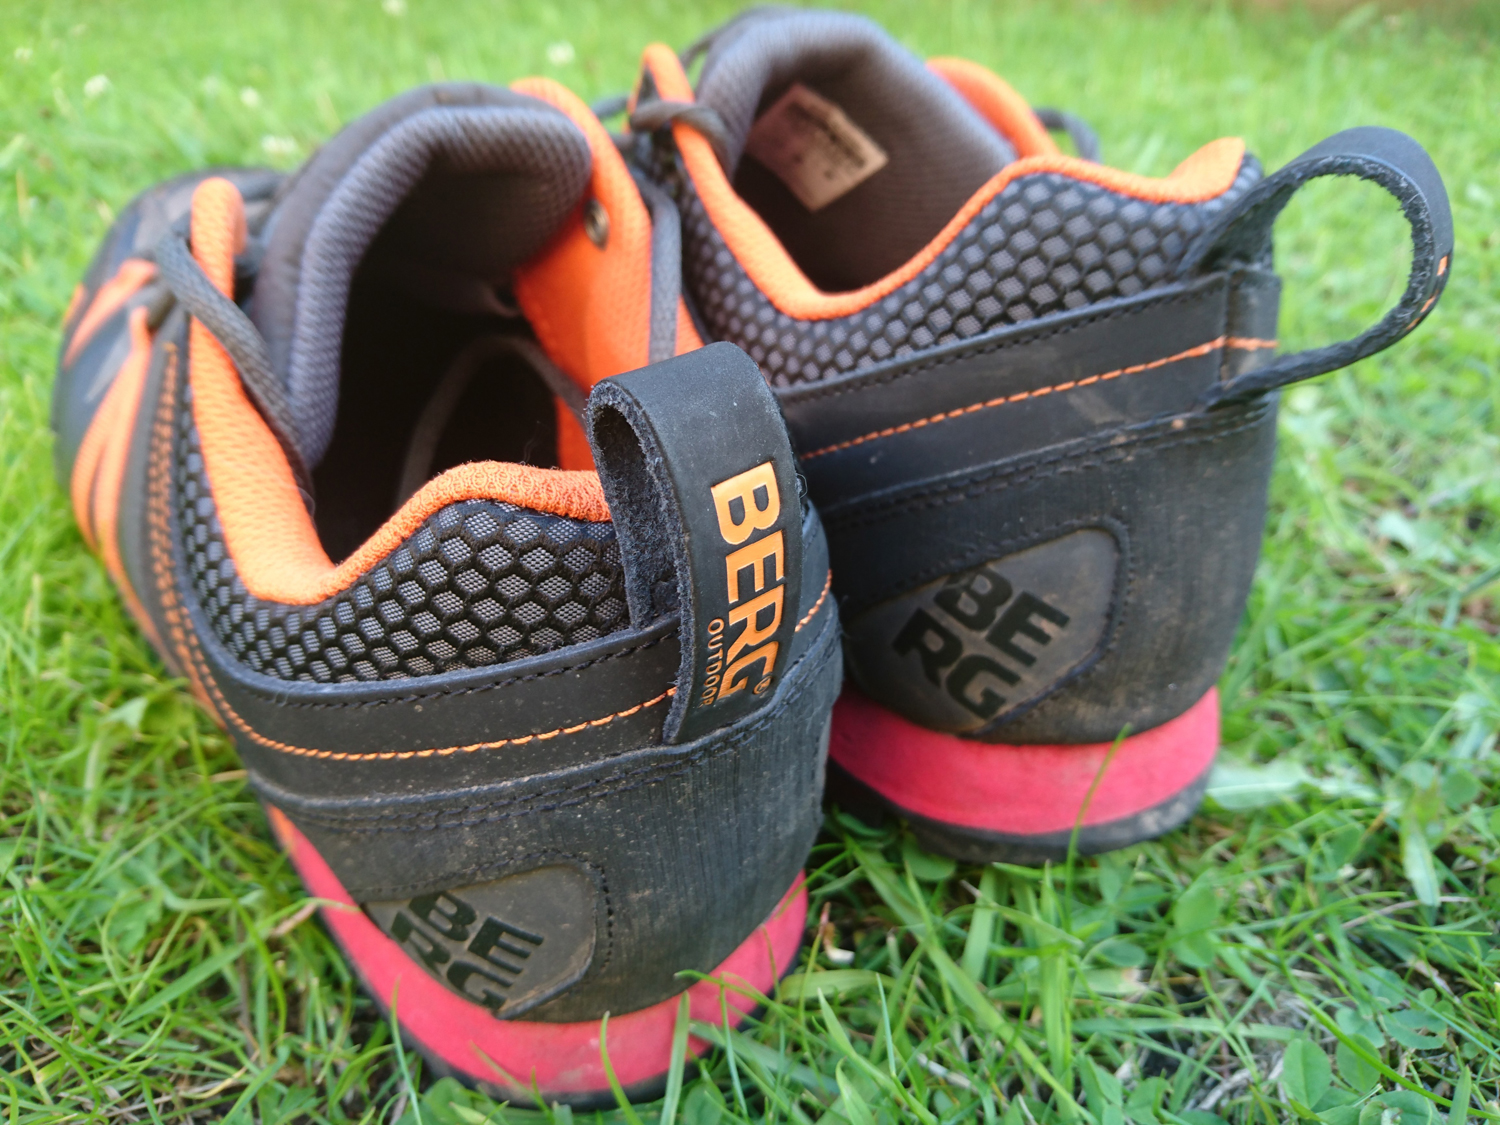 berg-outdoors-trainer-review03